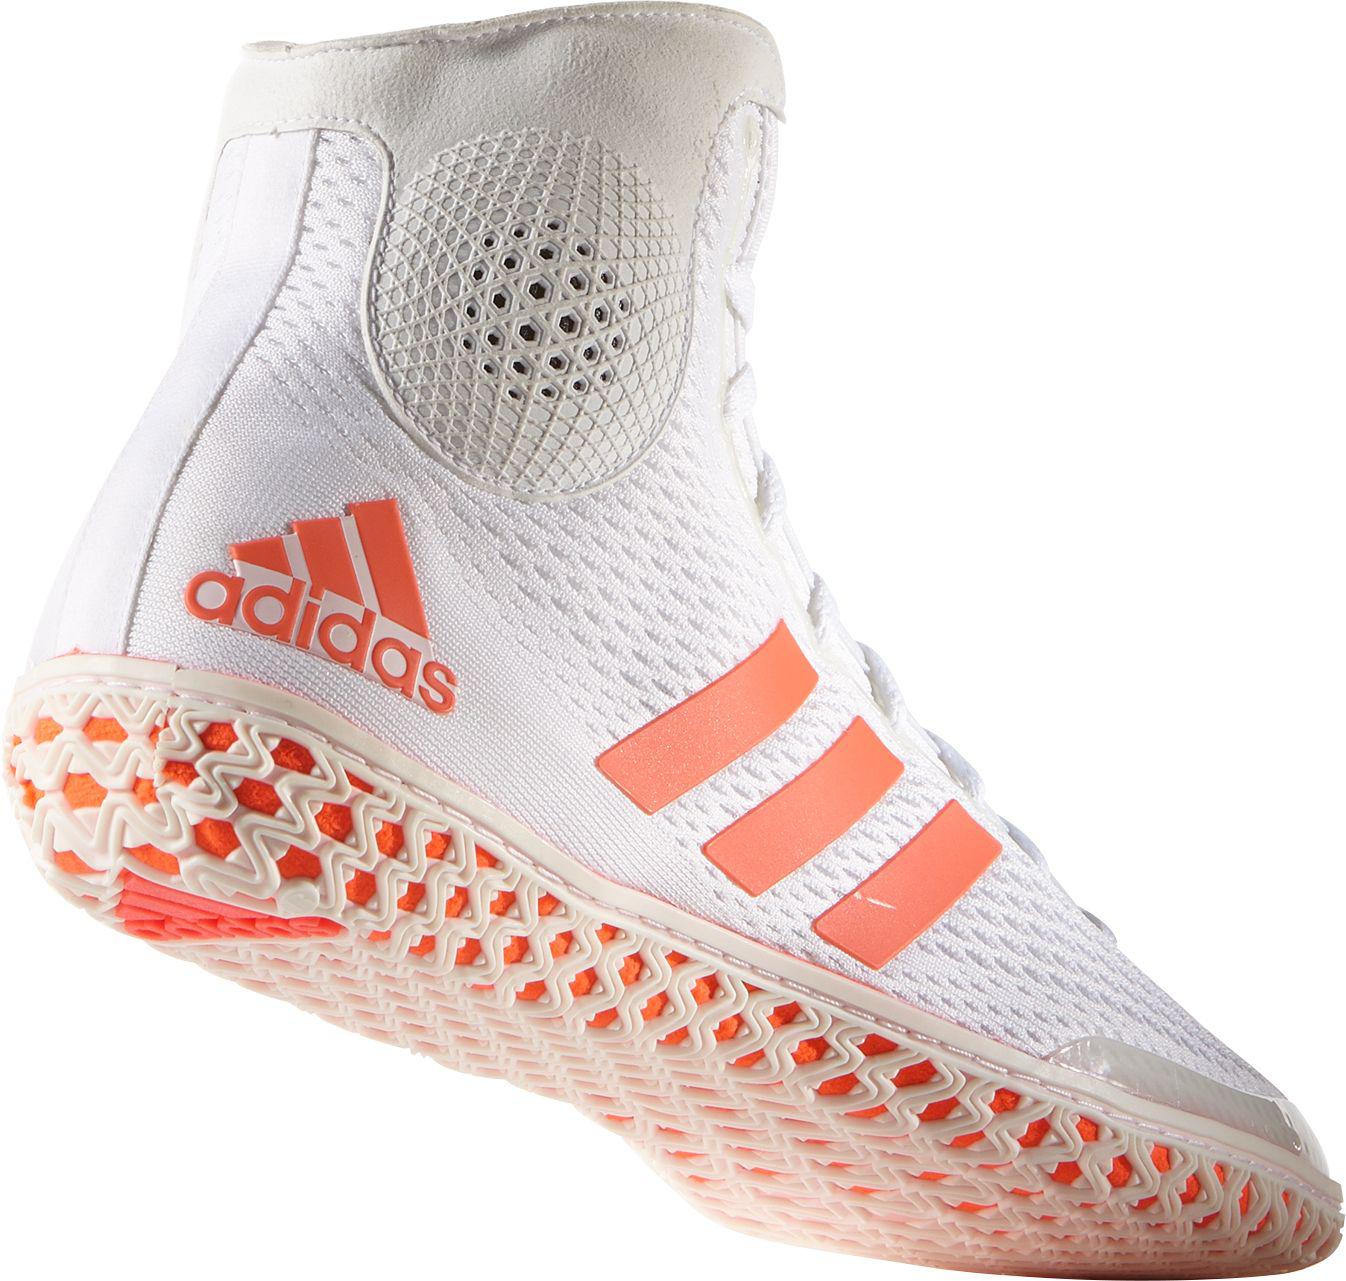 adidas Tech Fall Wrestling Shoes in 